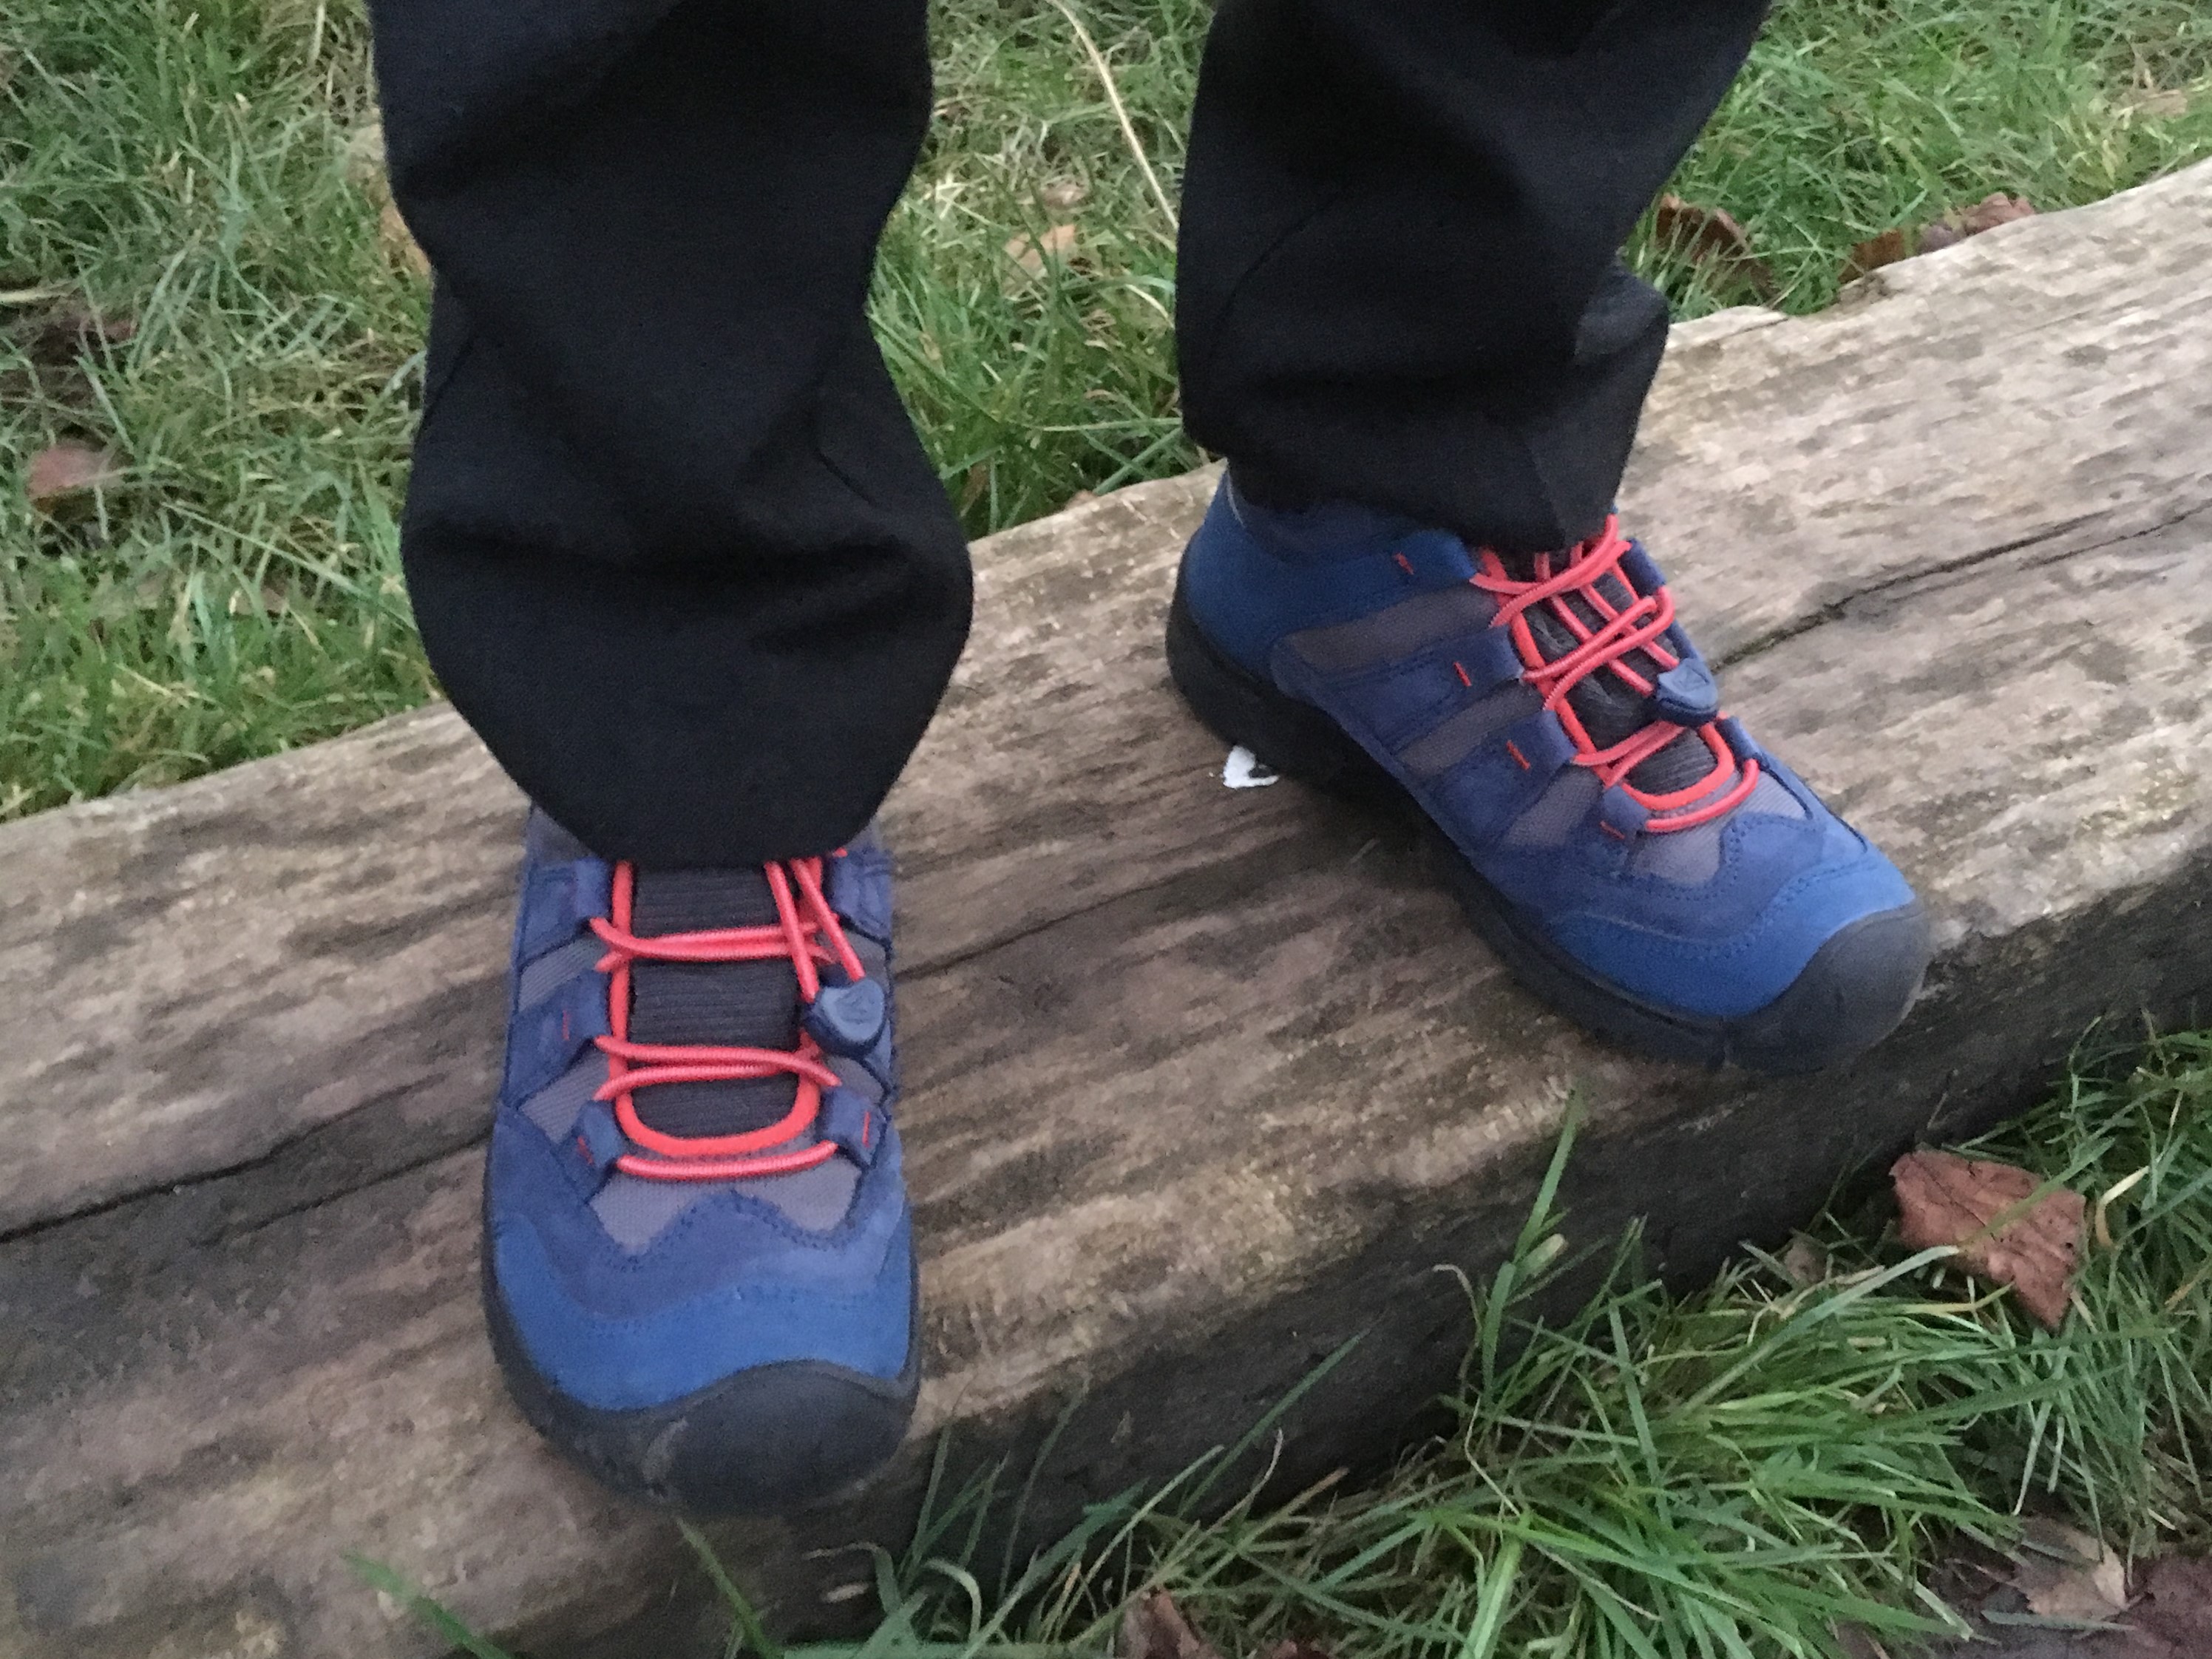 Hikeport Mid Waterproof Boots - Review